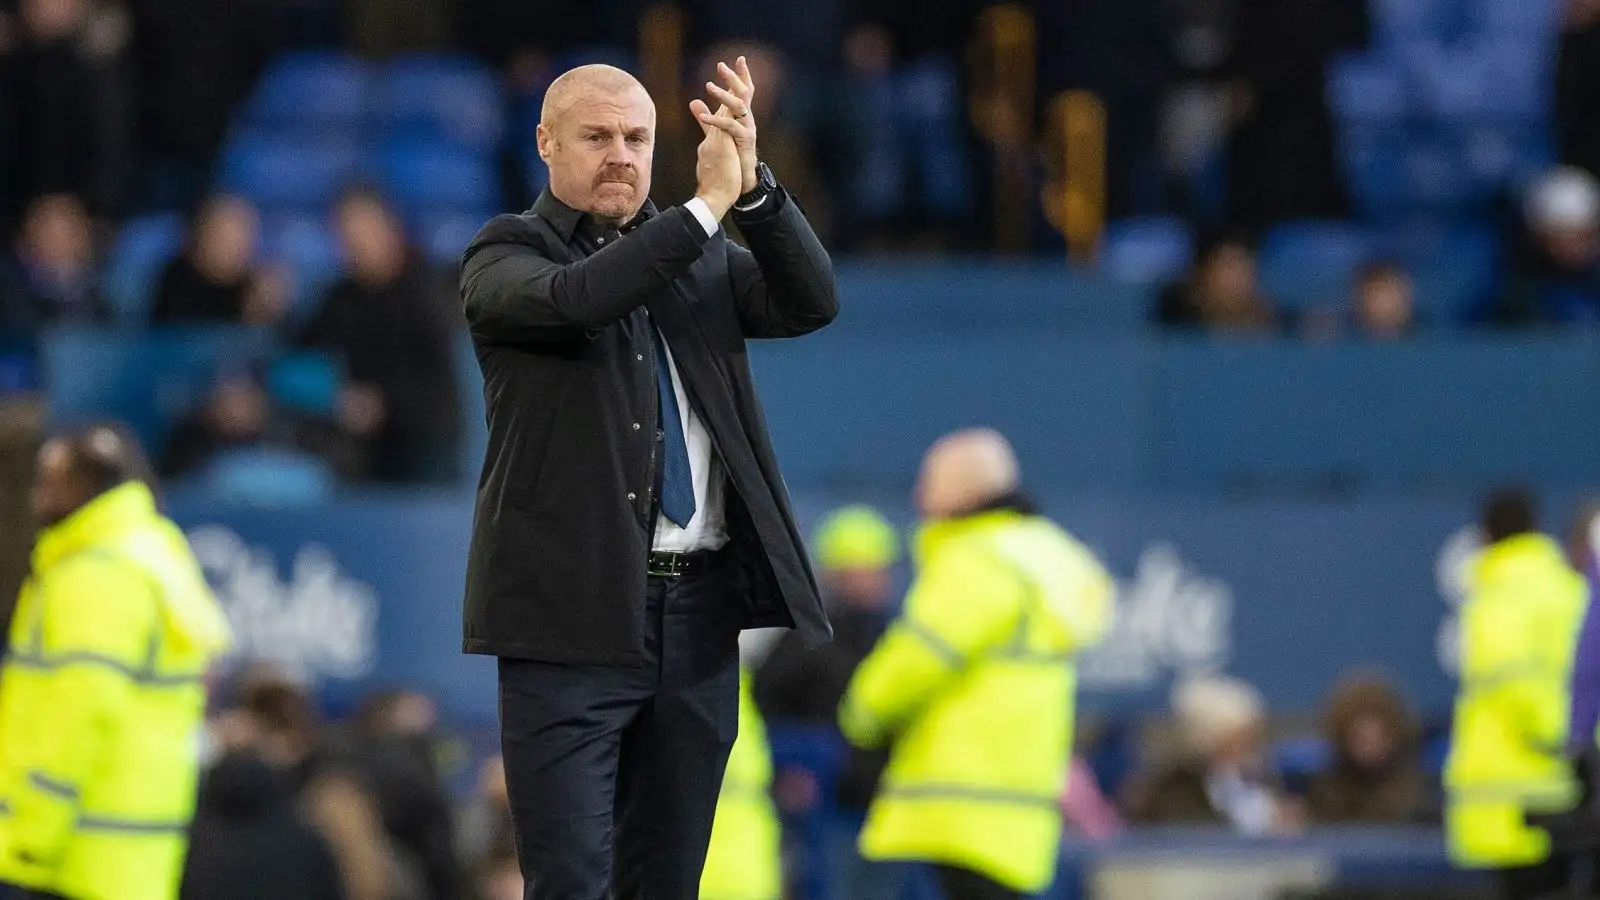 Sean Dyche applauds the fans after Everton lose 2-0 to Aston Villa in the Premier League